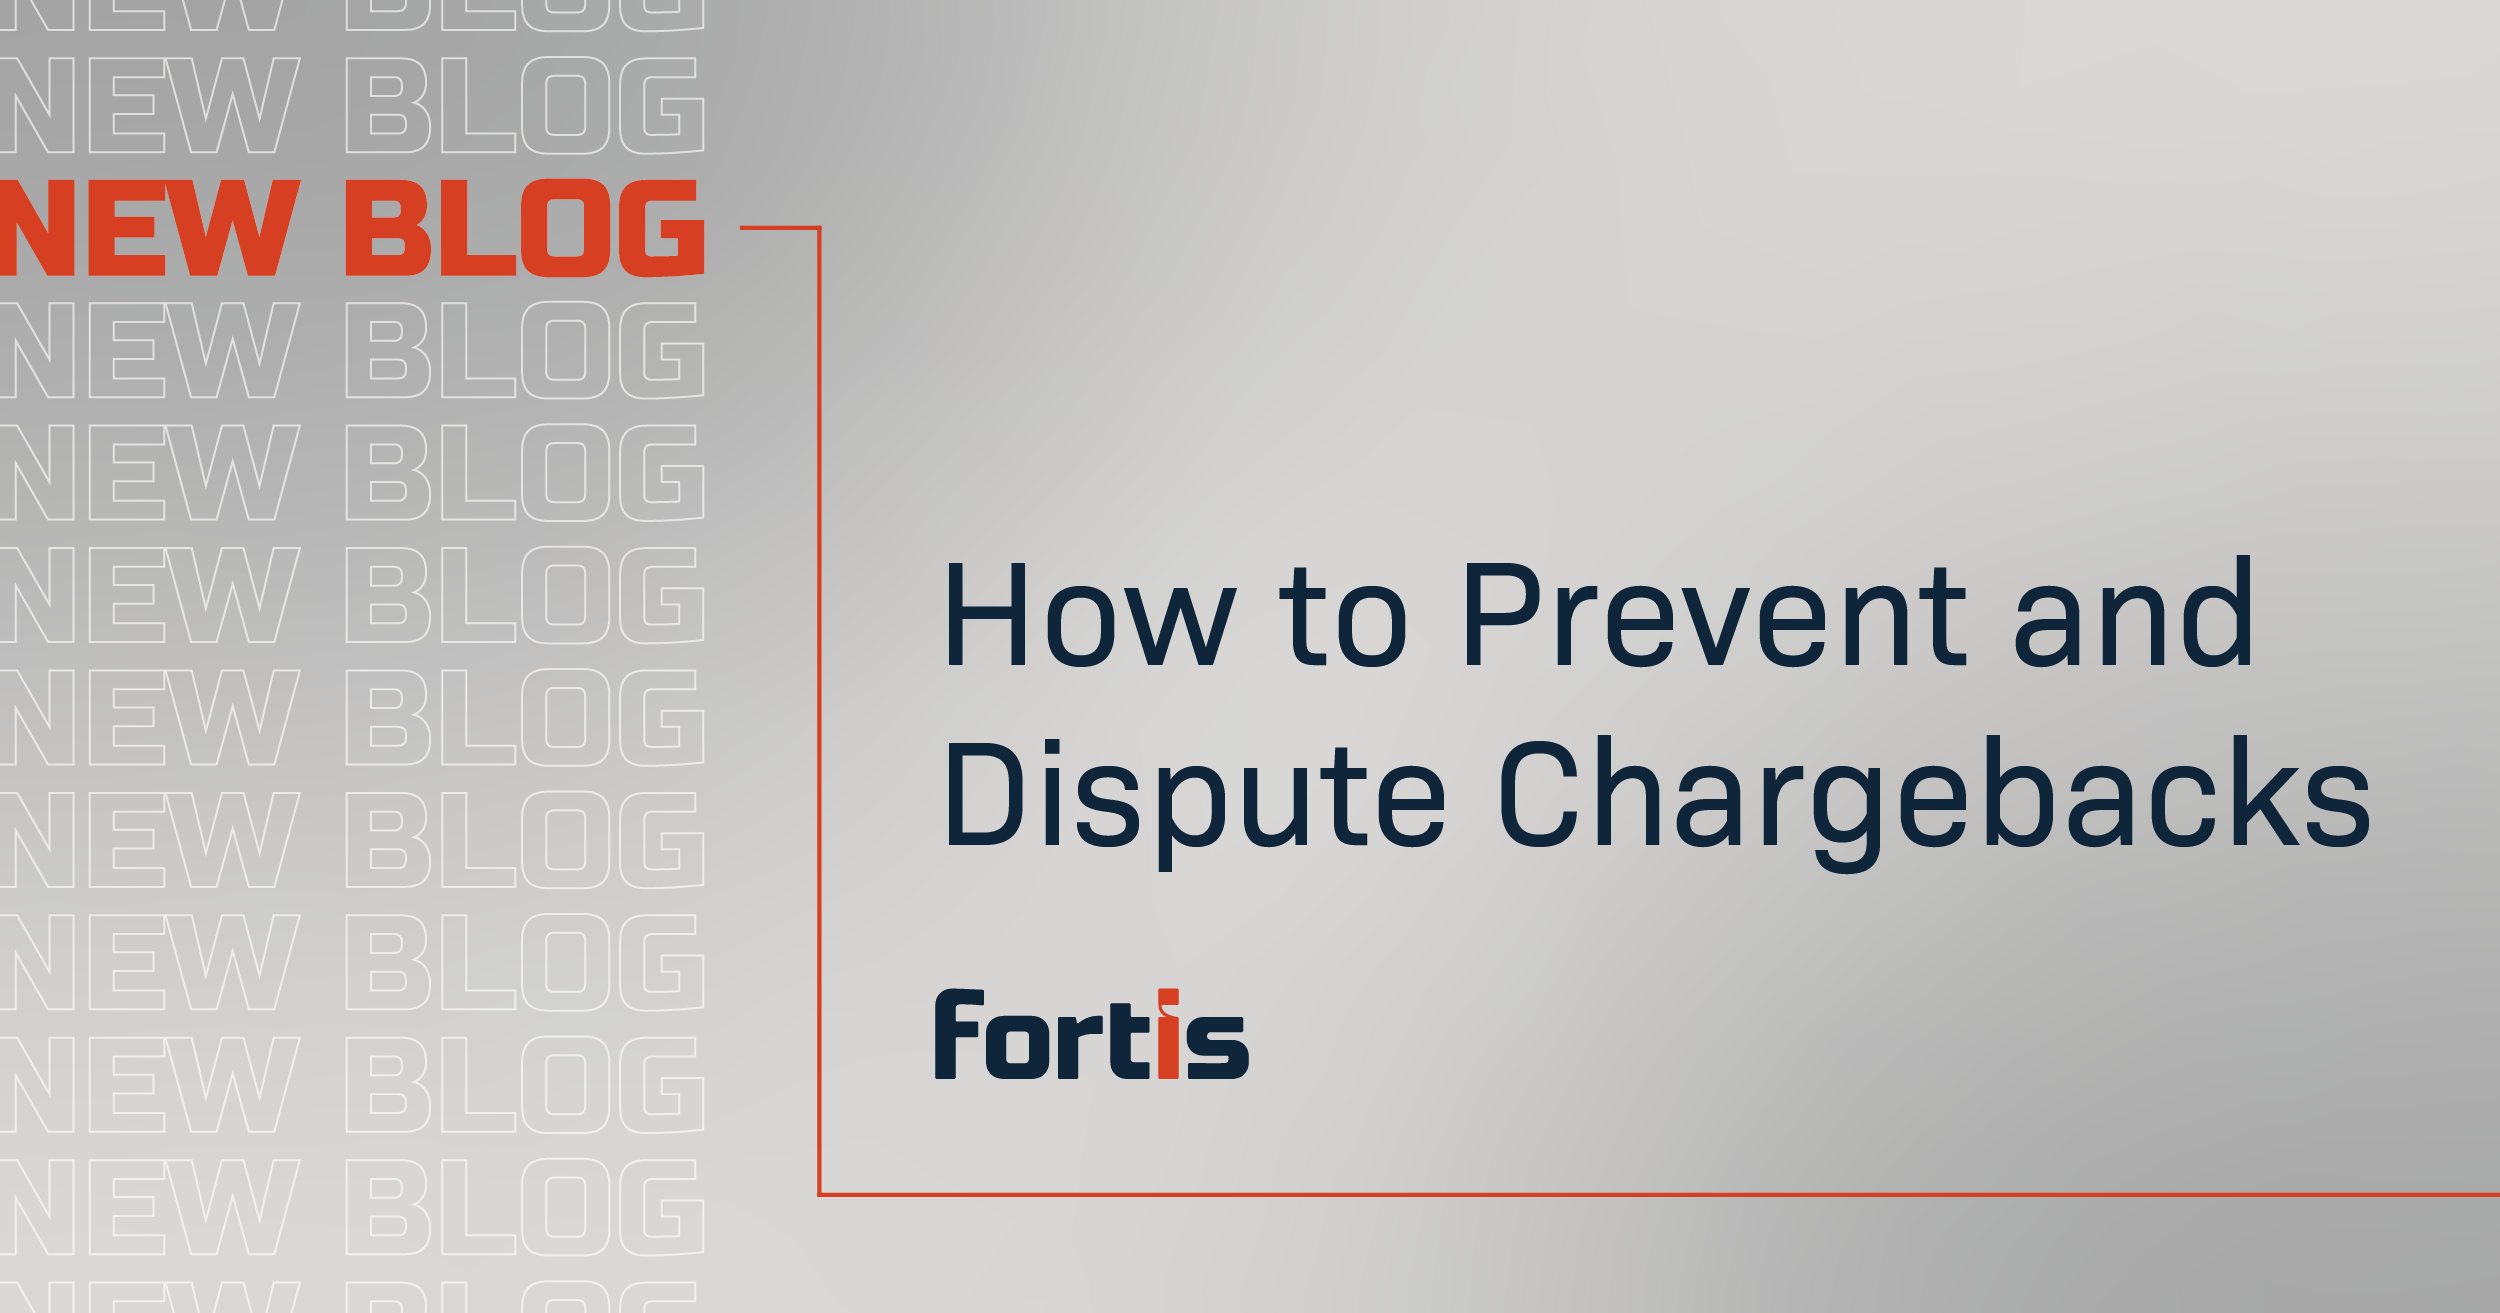 How to Prevent and Dispute Chargebacks - Featured Image